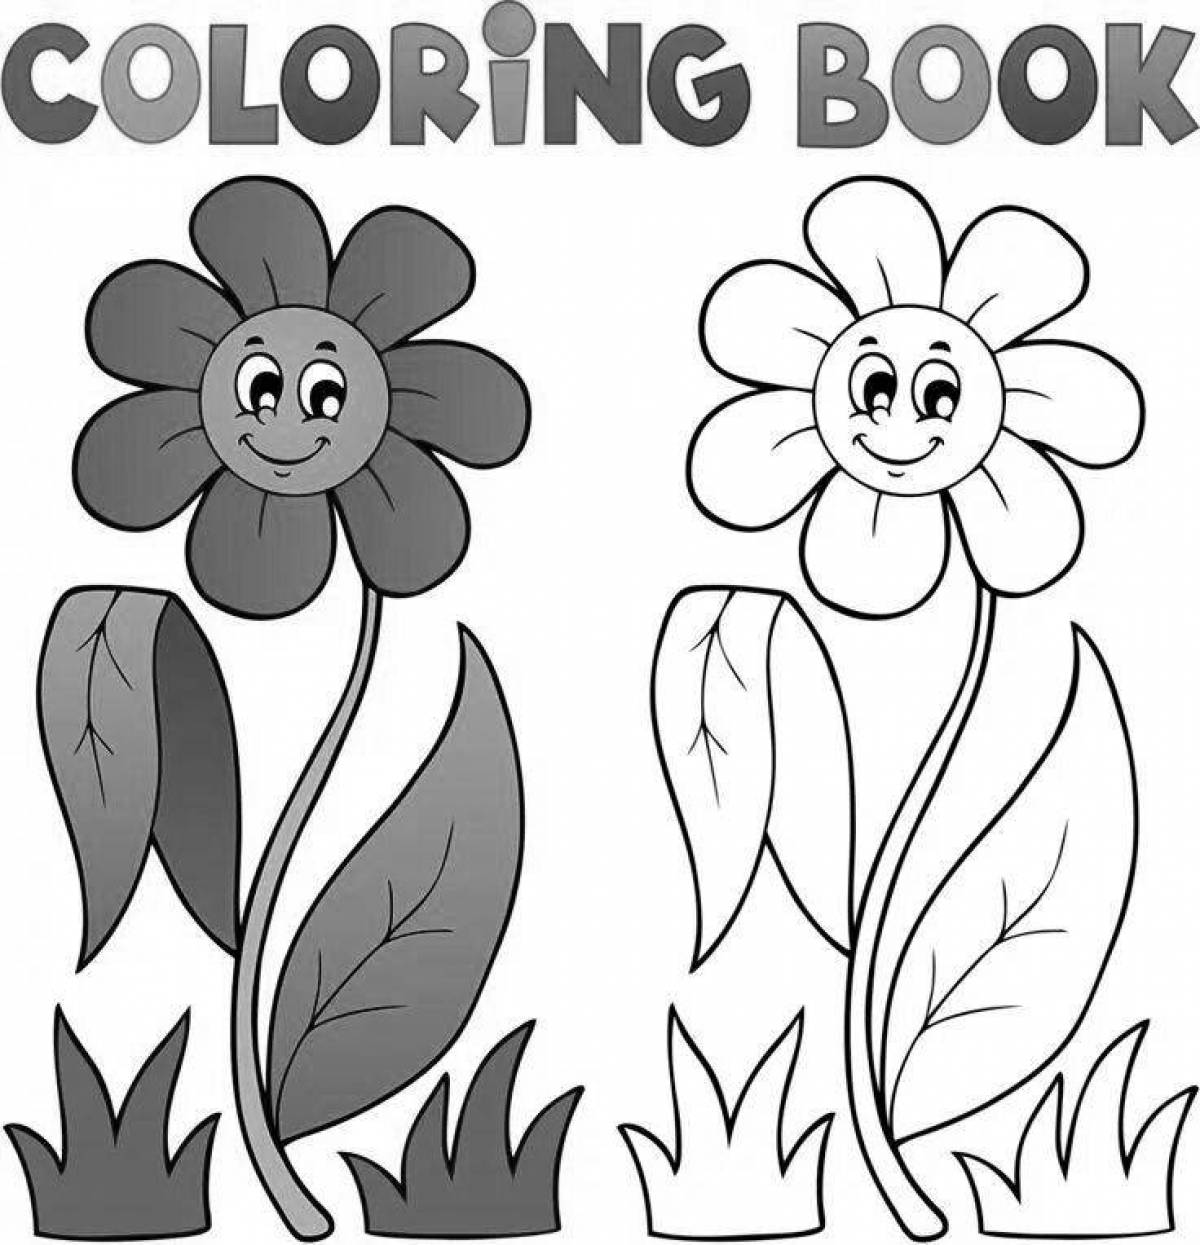 Bright coloring how to make a coloring book